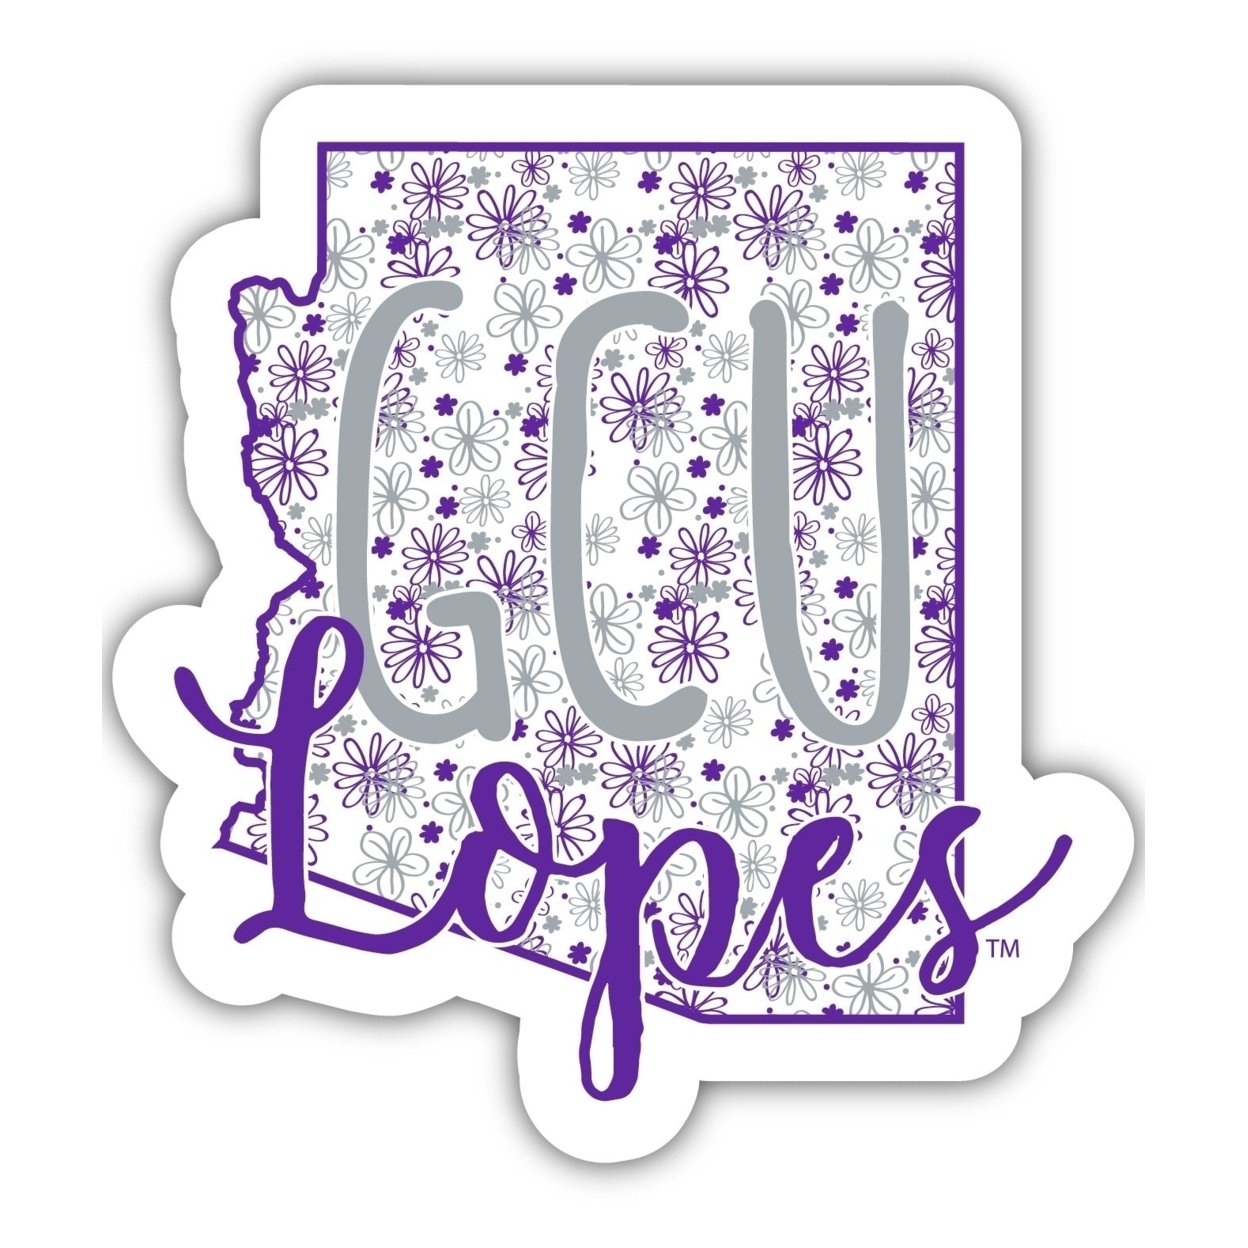 Grand Canyon University Lopes Floral State Die Cut Decal 4-Inch